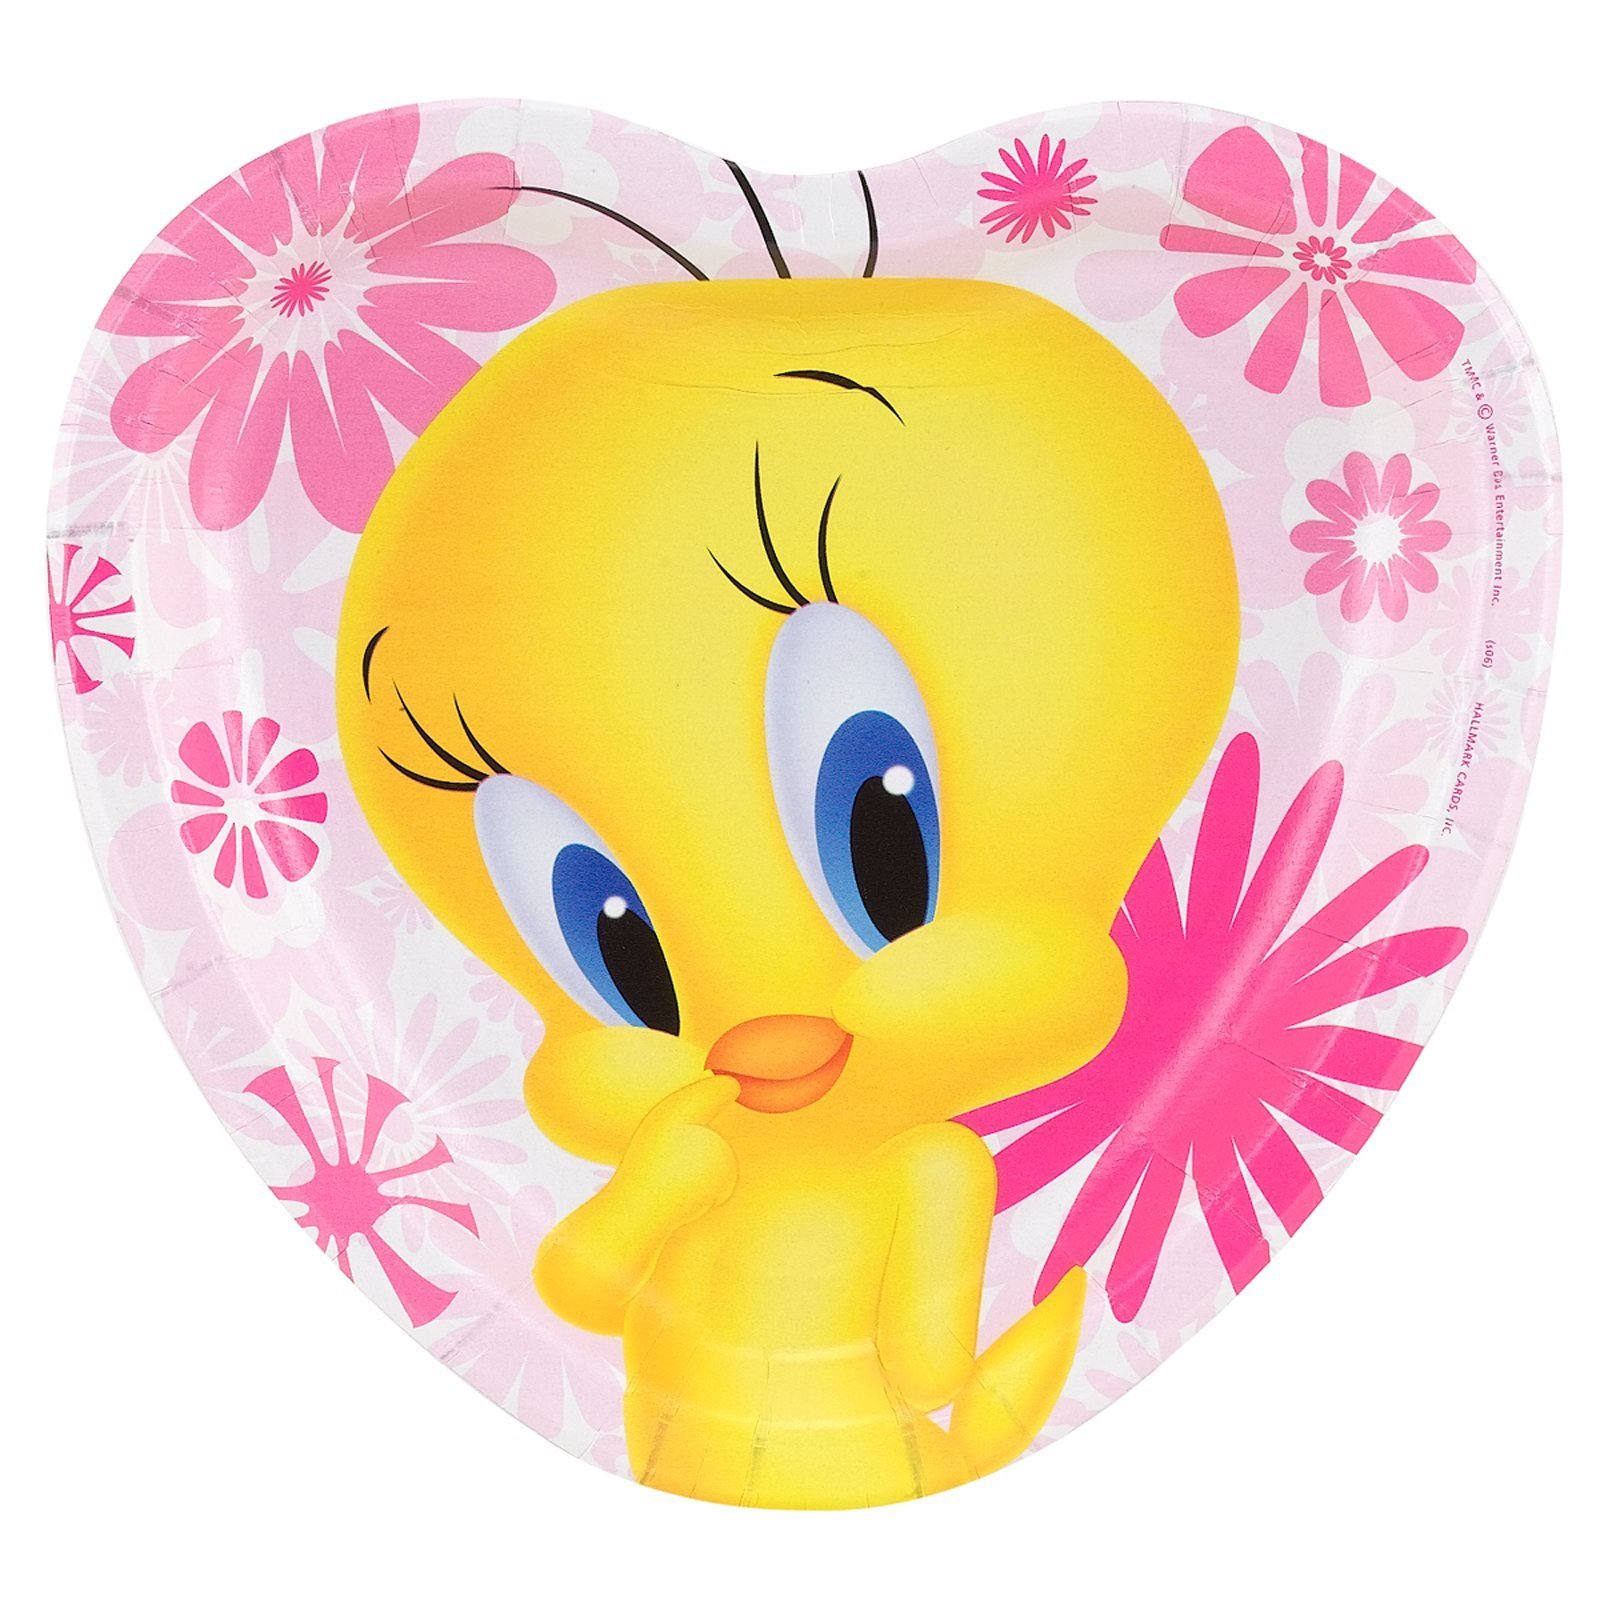 Tweety Bird Birthday Pictures - HD Wallpapers and Pictures